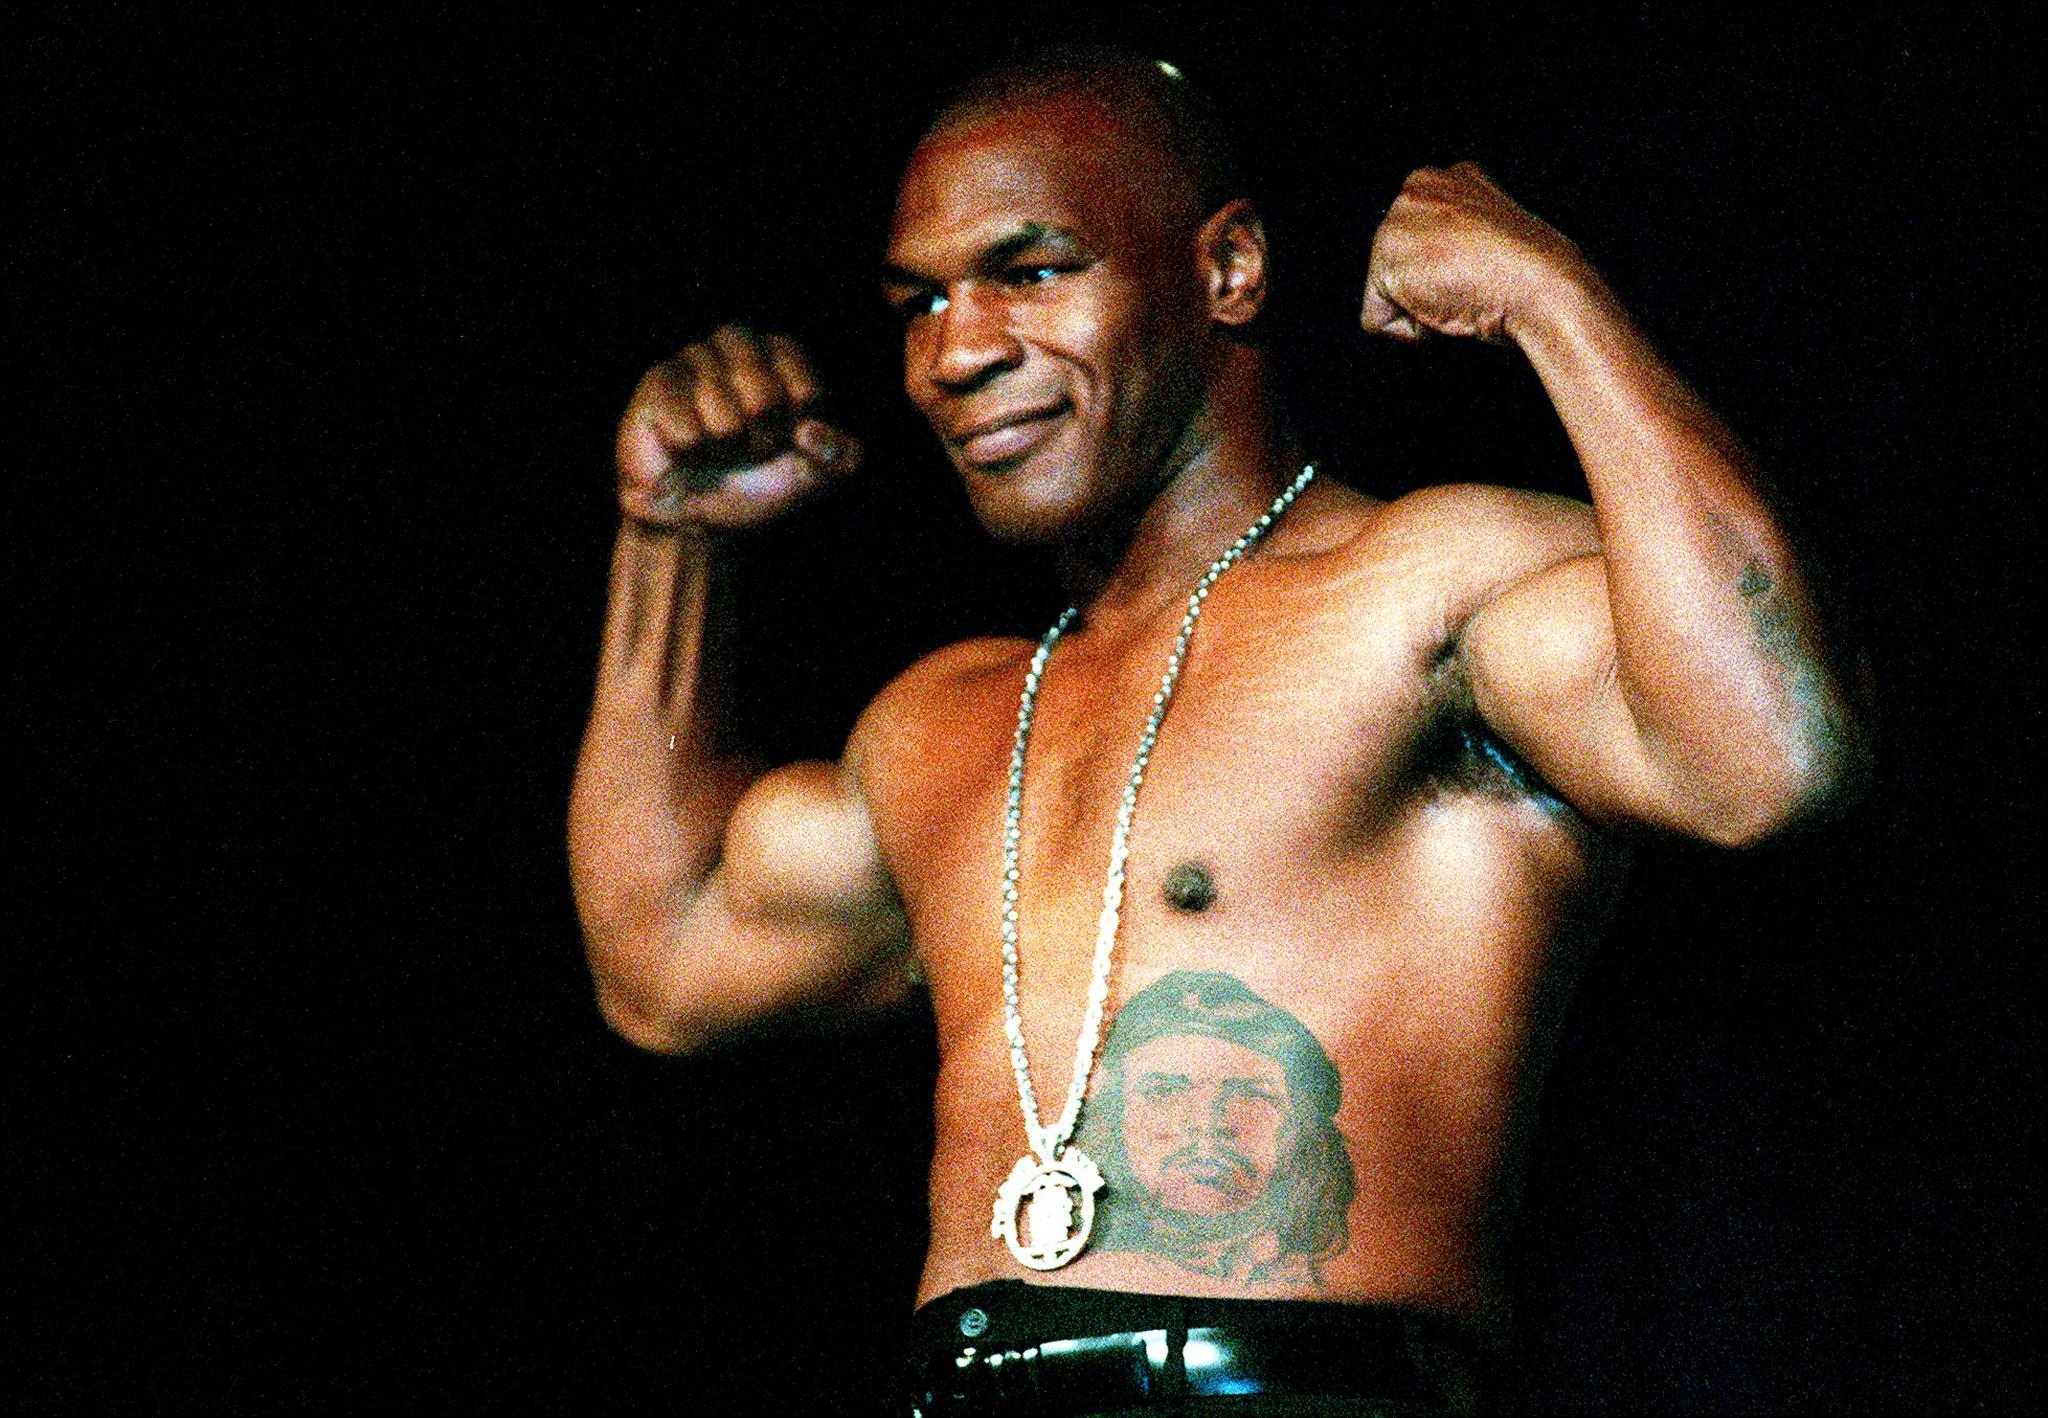 Mike Tyson with a Che Guevara tattoo